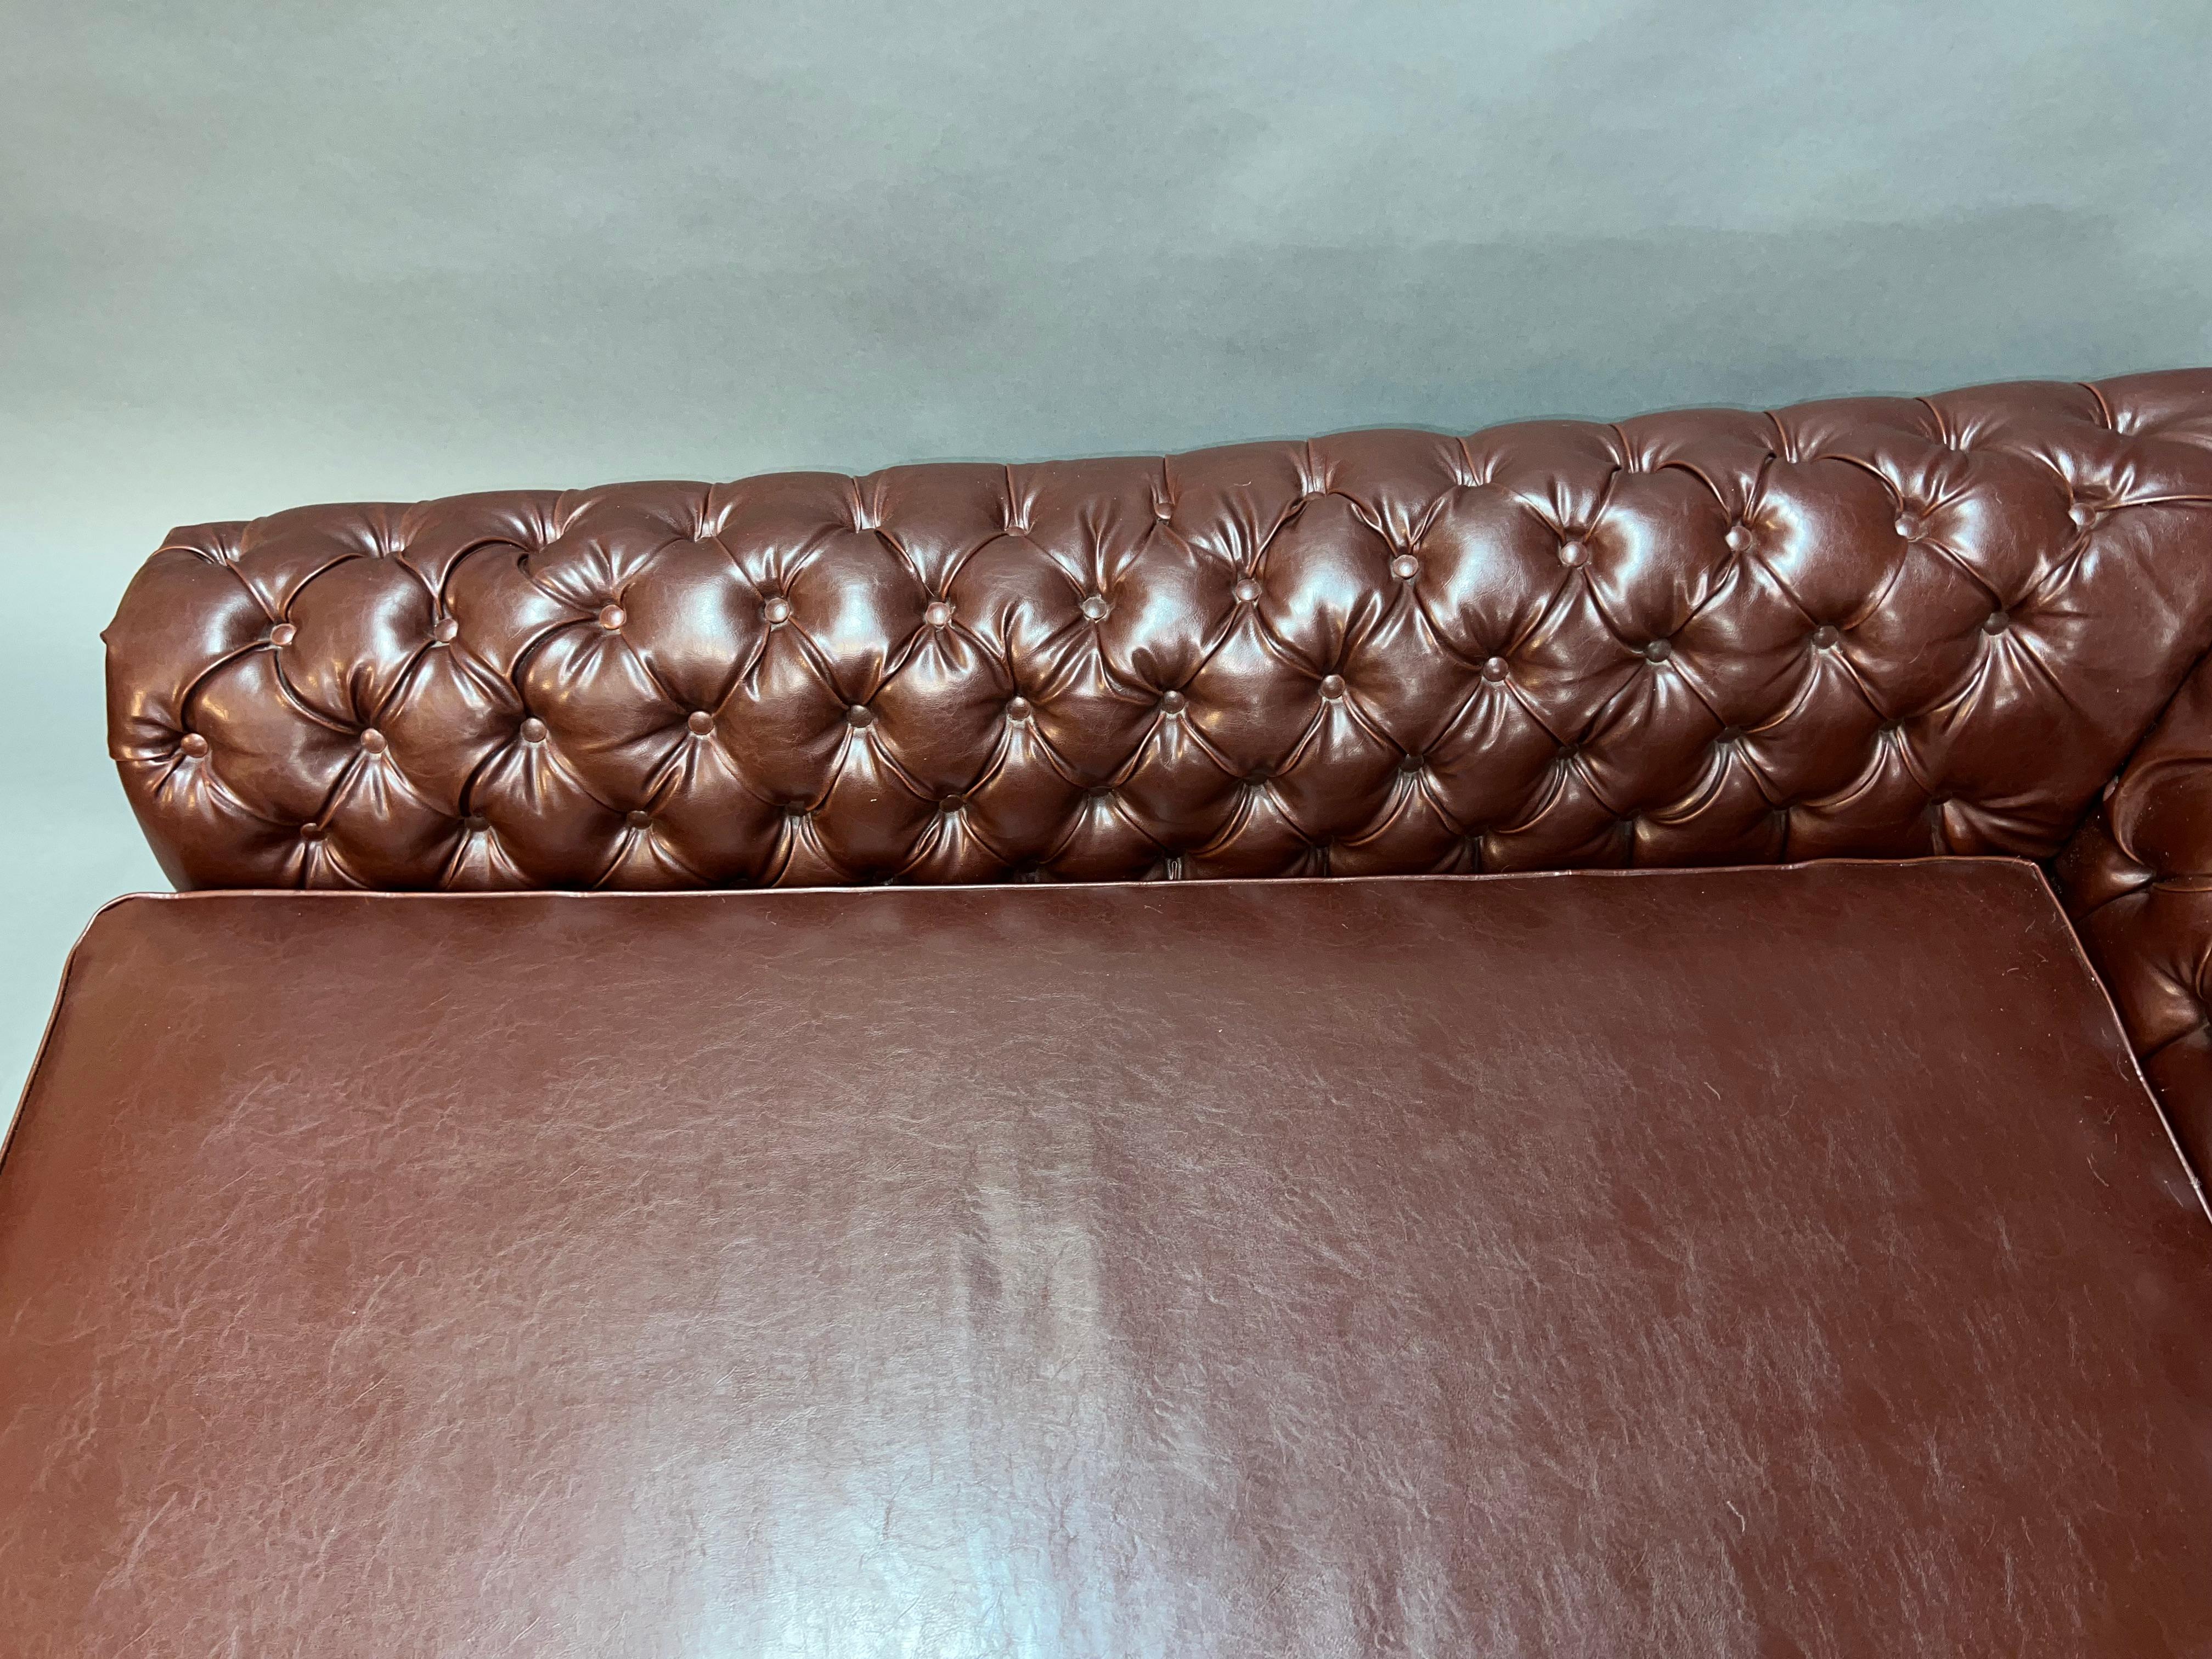 Lovely Vintage Chesterfield Brown Leder Look Chaise Lounge Daybed Sofa (Englisch) im Angebot